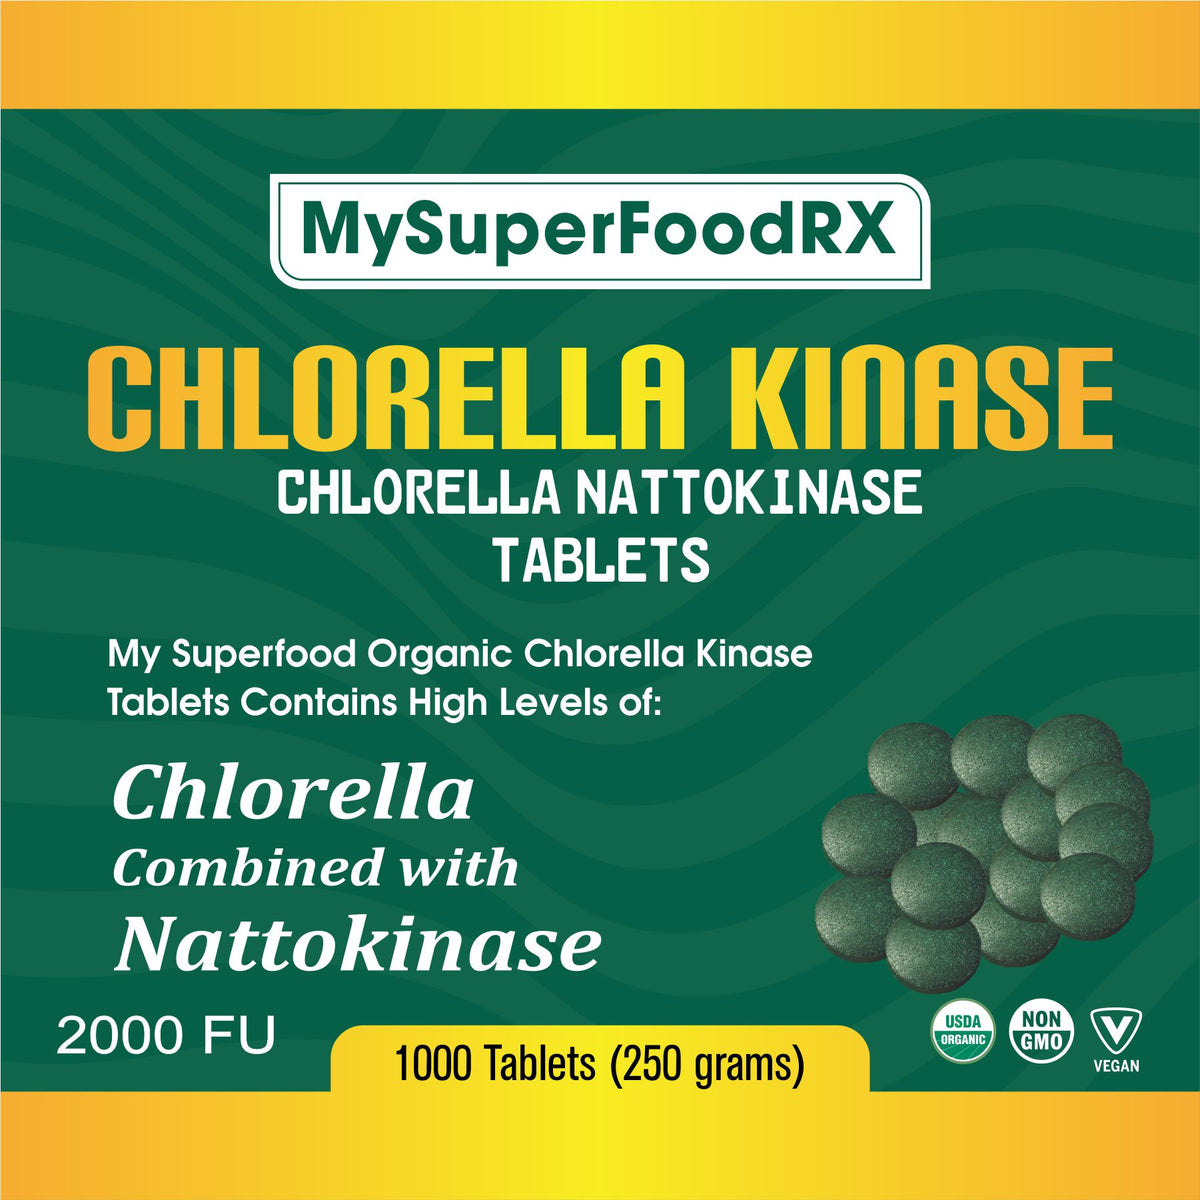 the label for my superfood rx chlorella kinse tablets